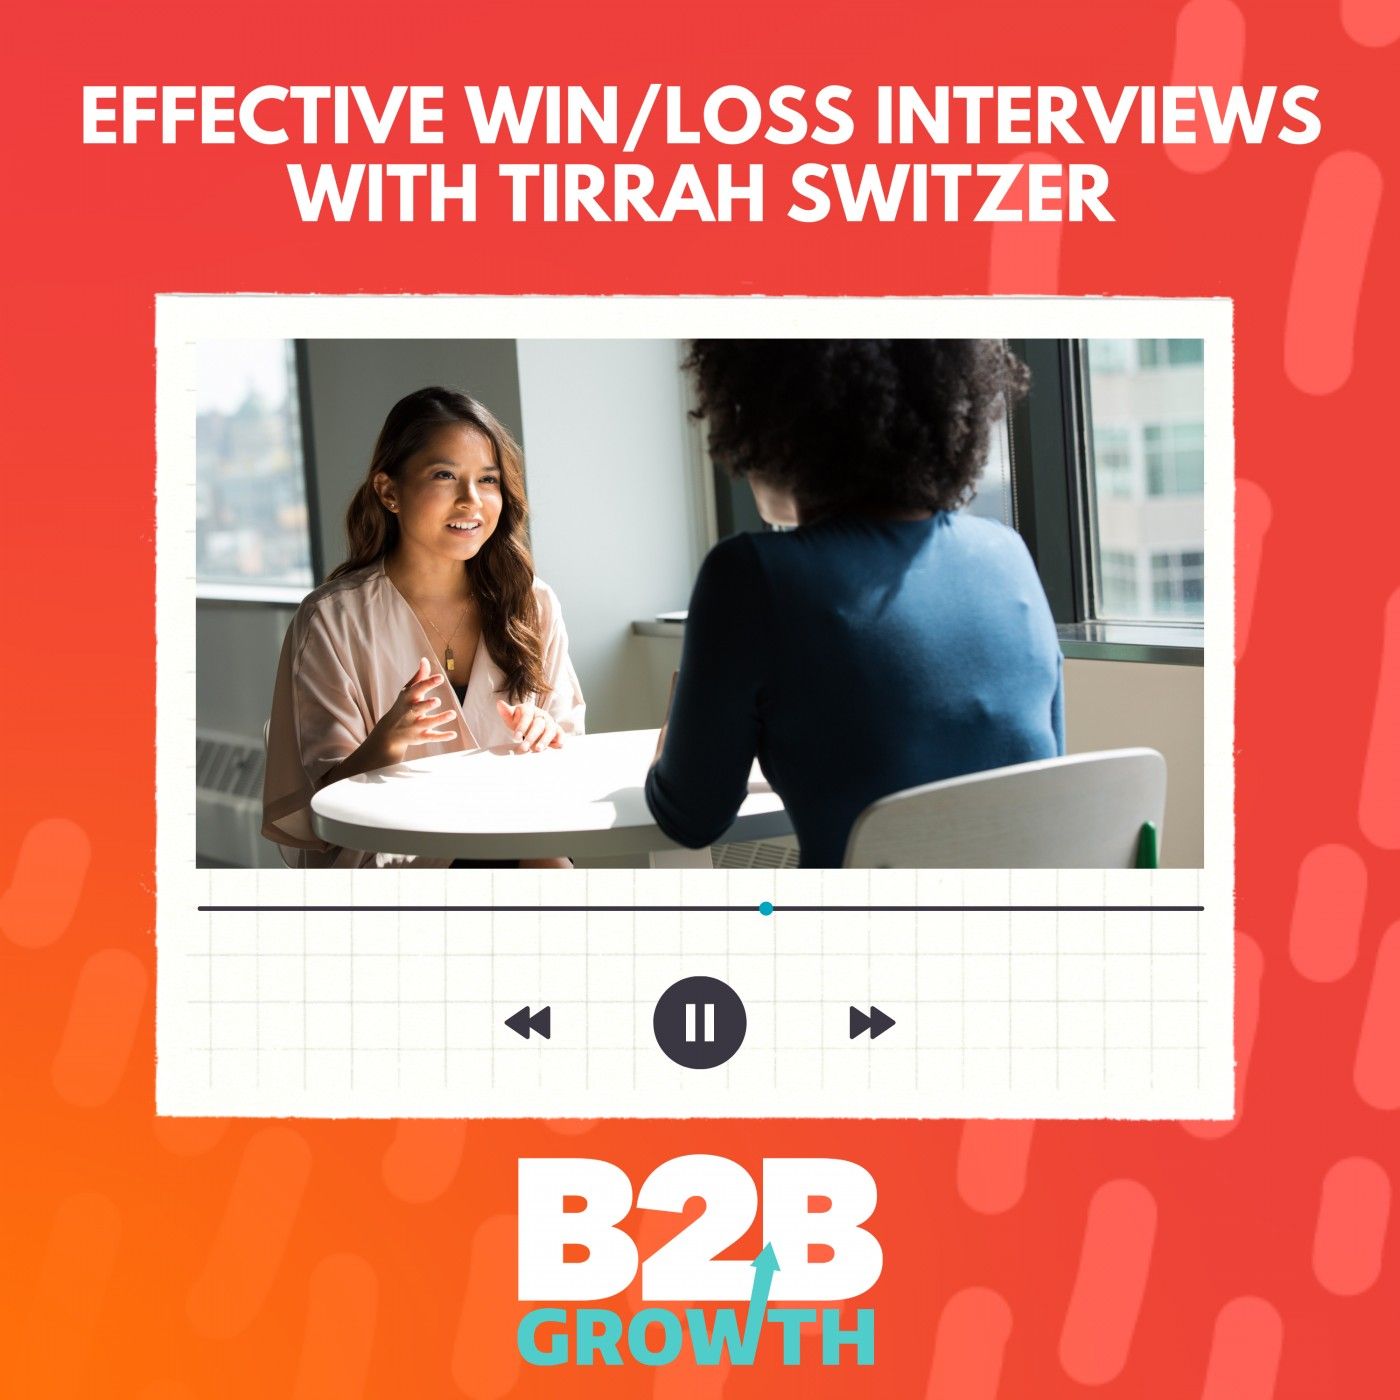 Effective Win/Loss Interviews, with Tirrah Switzer